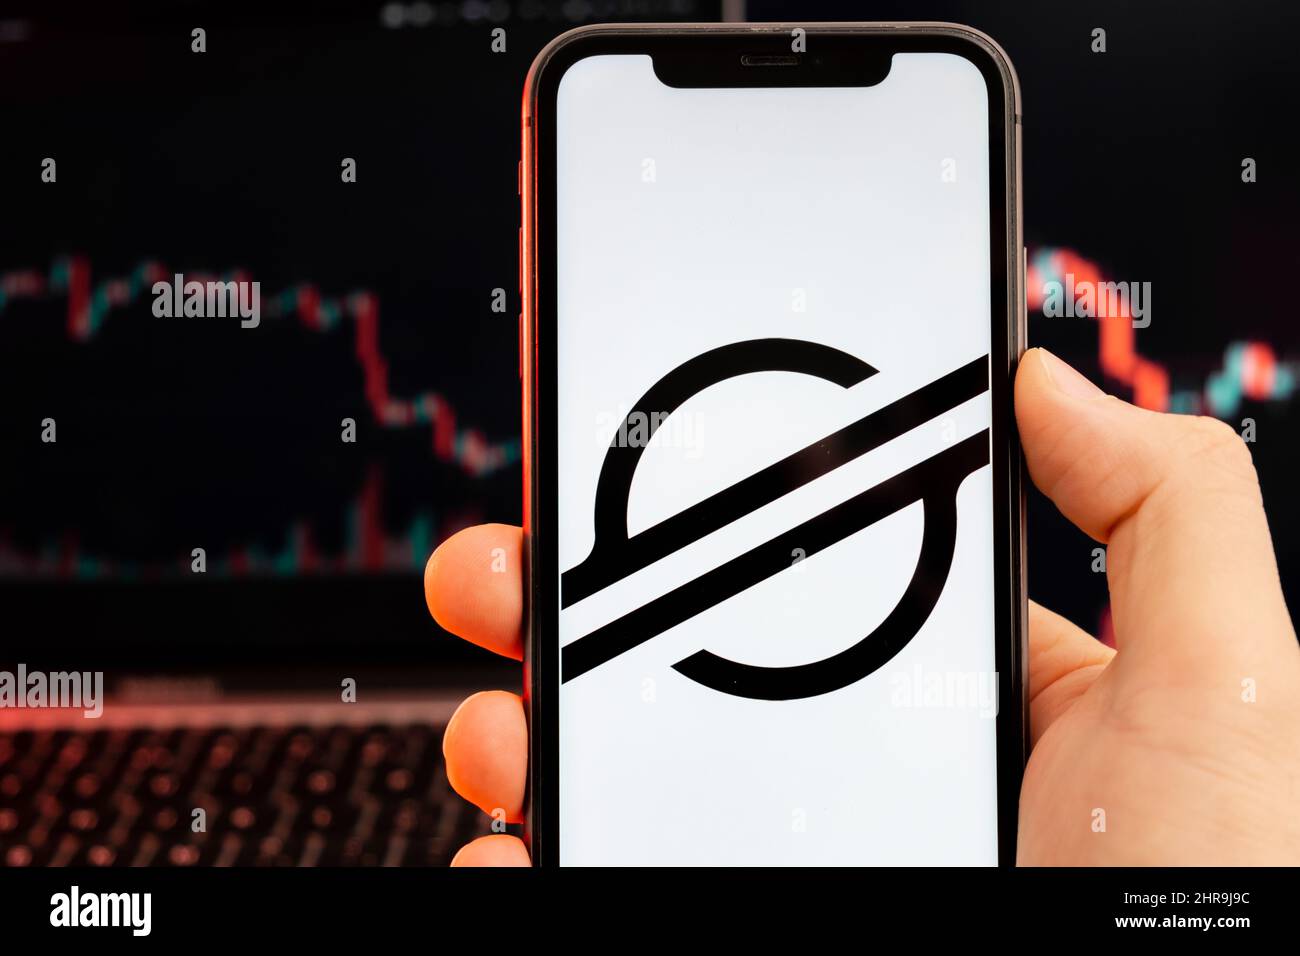 Stellar XLM cryptocurrency logo on the screen of smartphone in mans hand with downtrend on the chart on a red light background, February 2022, San Francisco, USA. Stock Photo